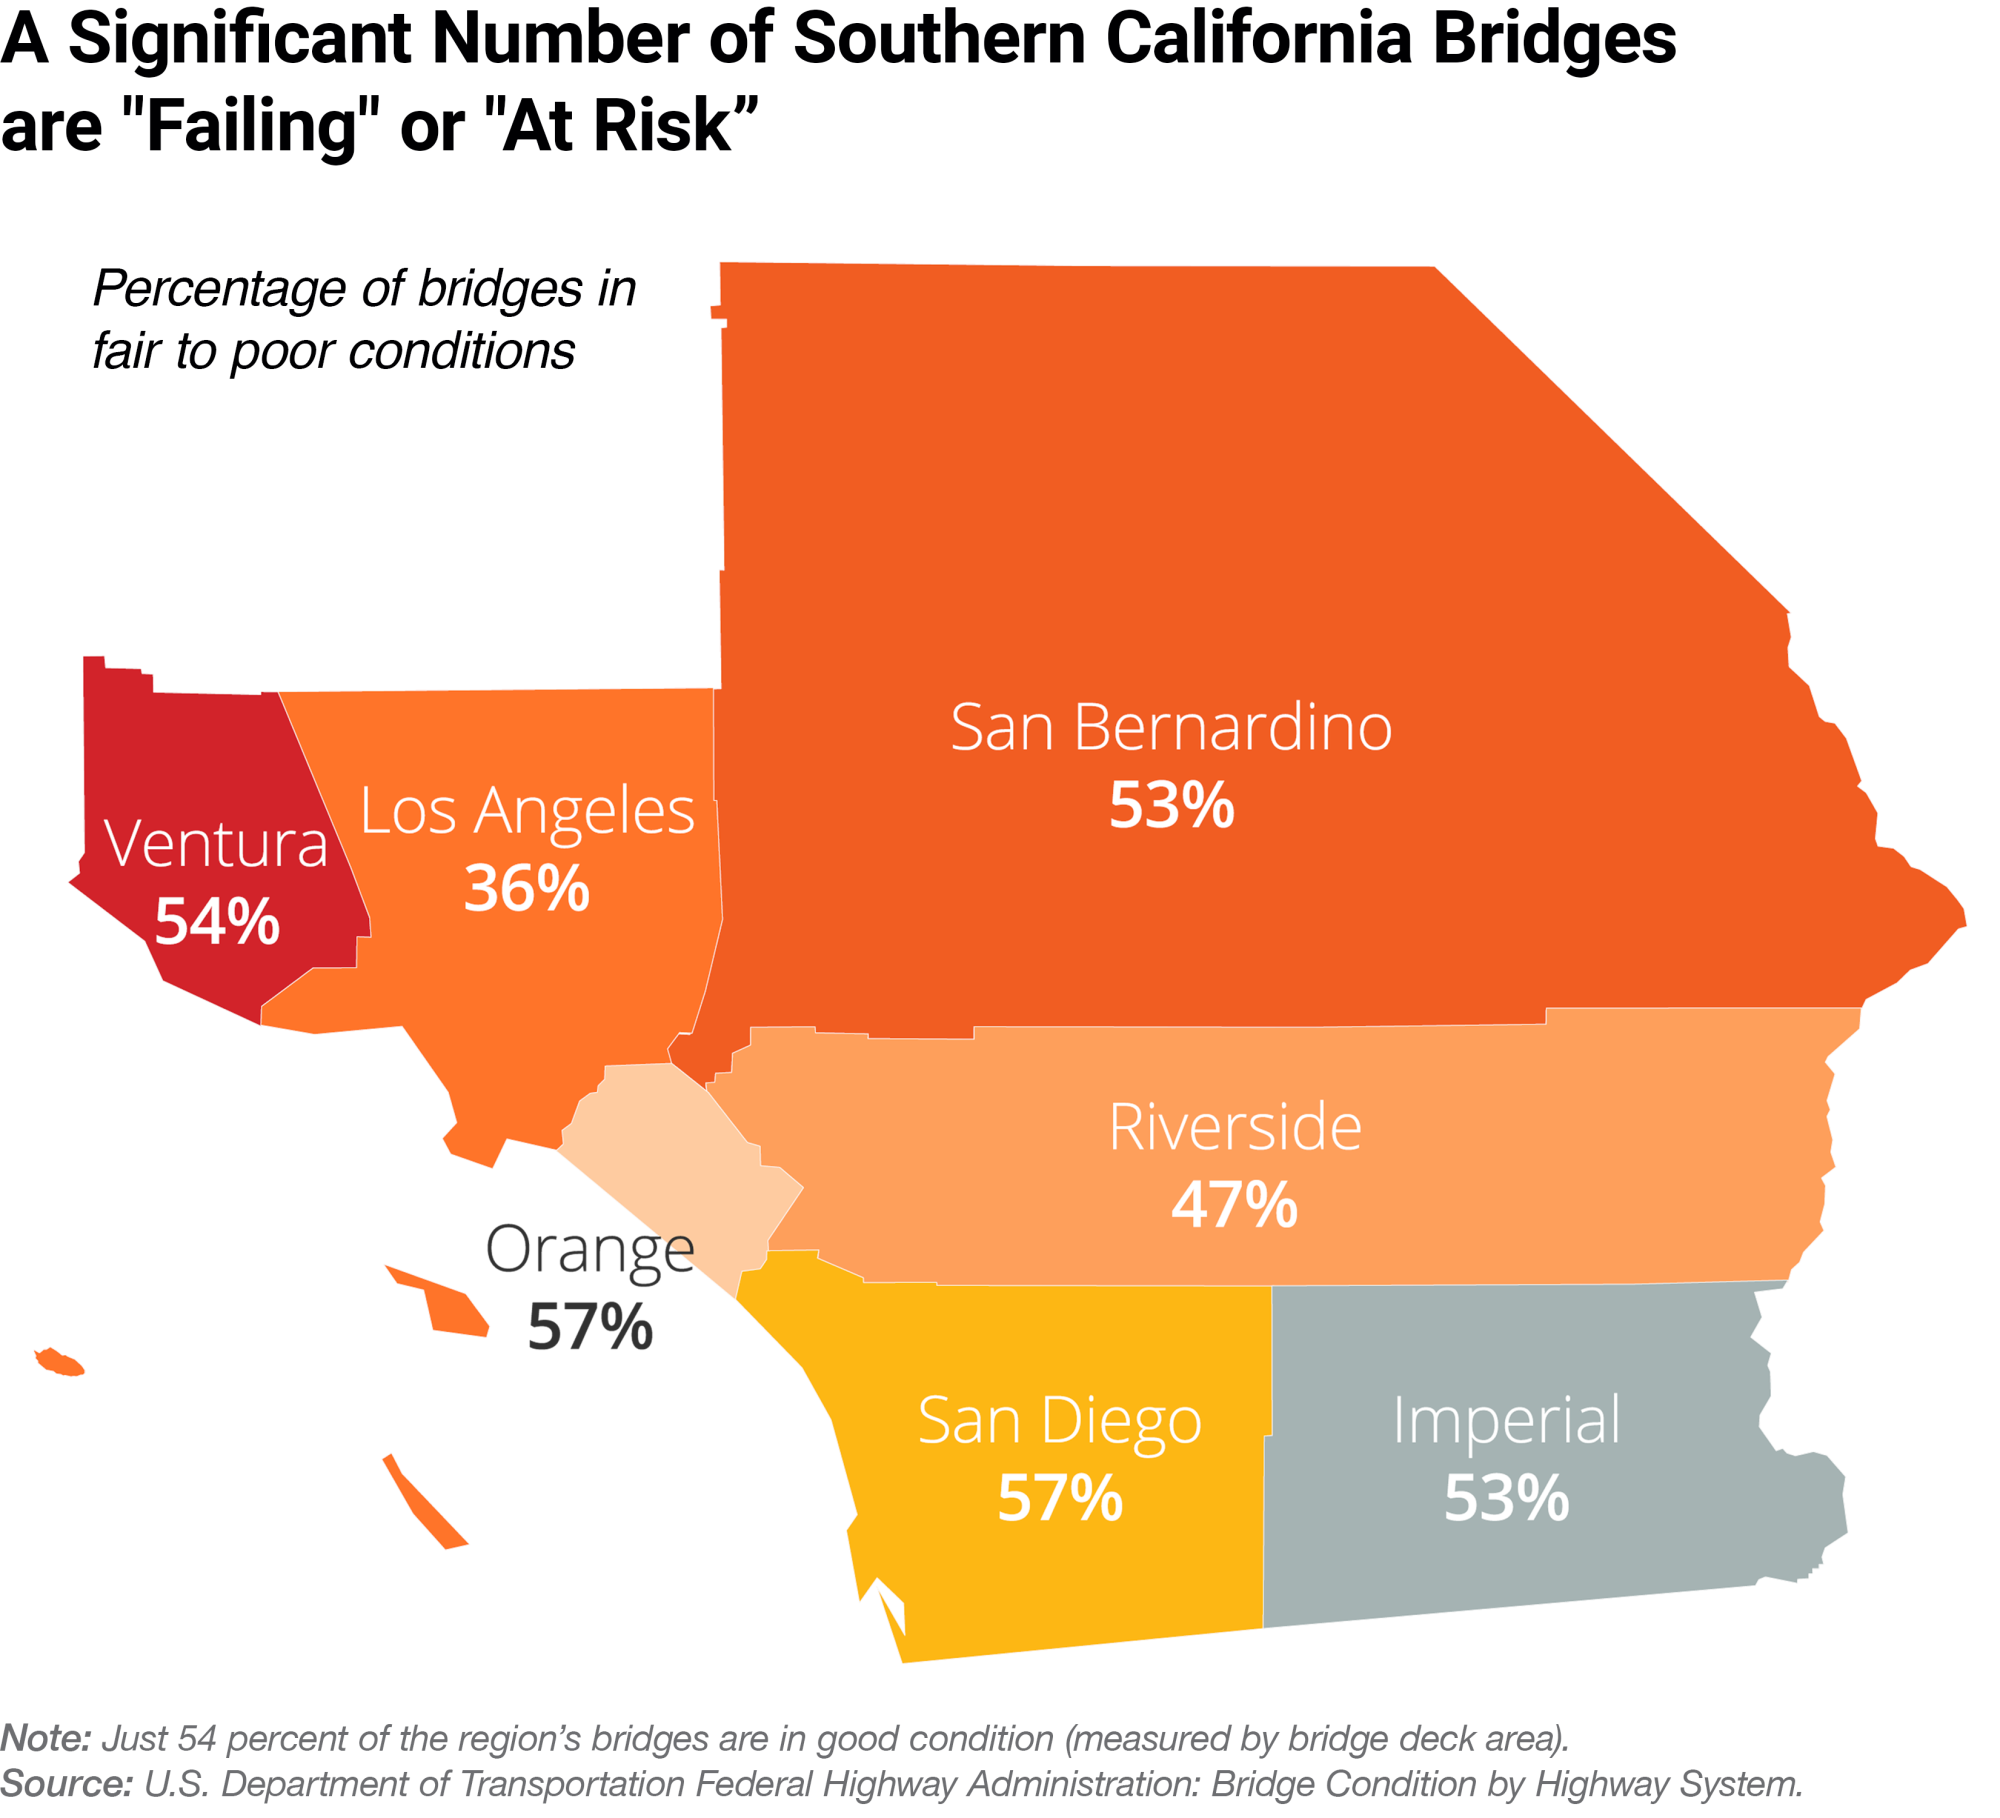 A significant number of Southern California bridges are “failing” or “at risk”.